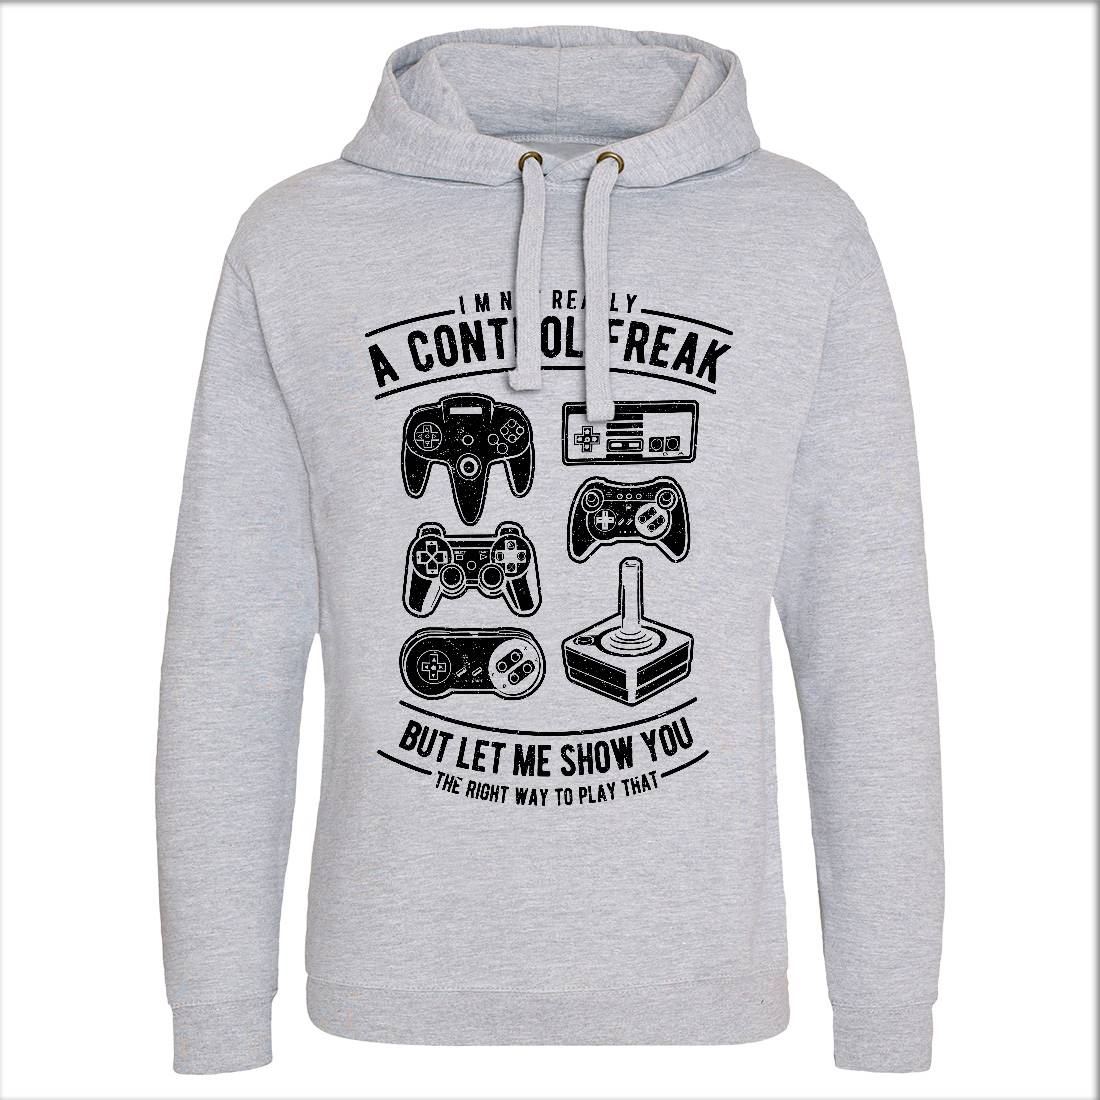 A Control Freak Mens Hoodie Without Pocket Geek A601